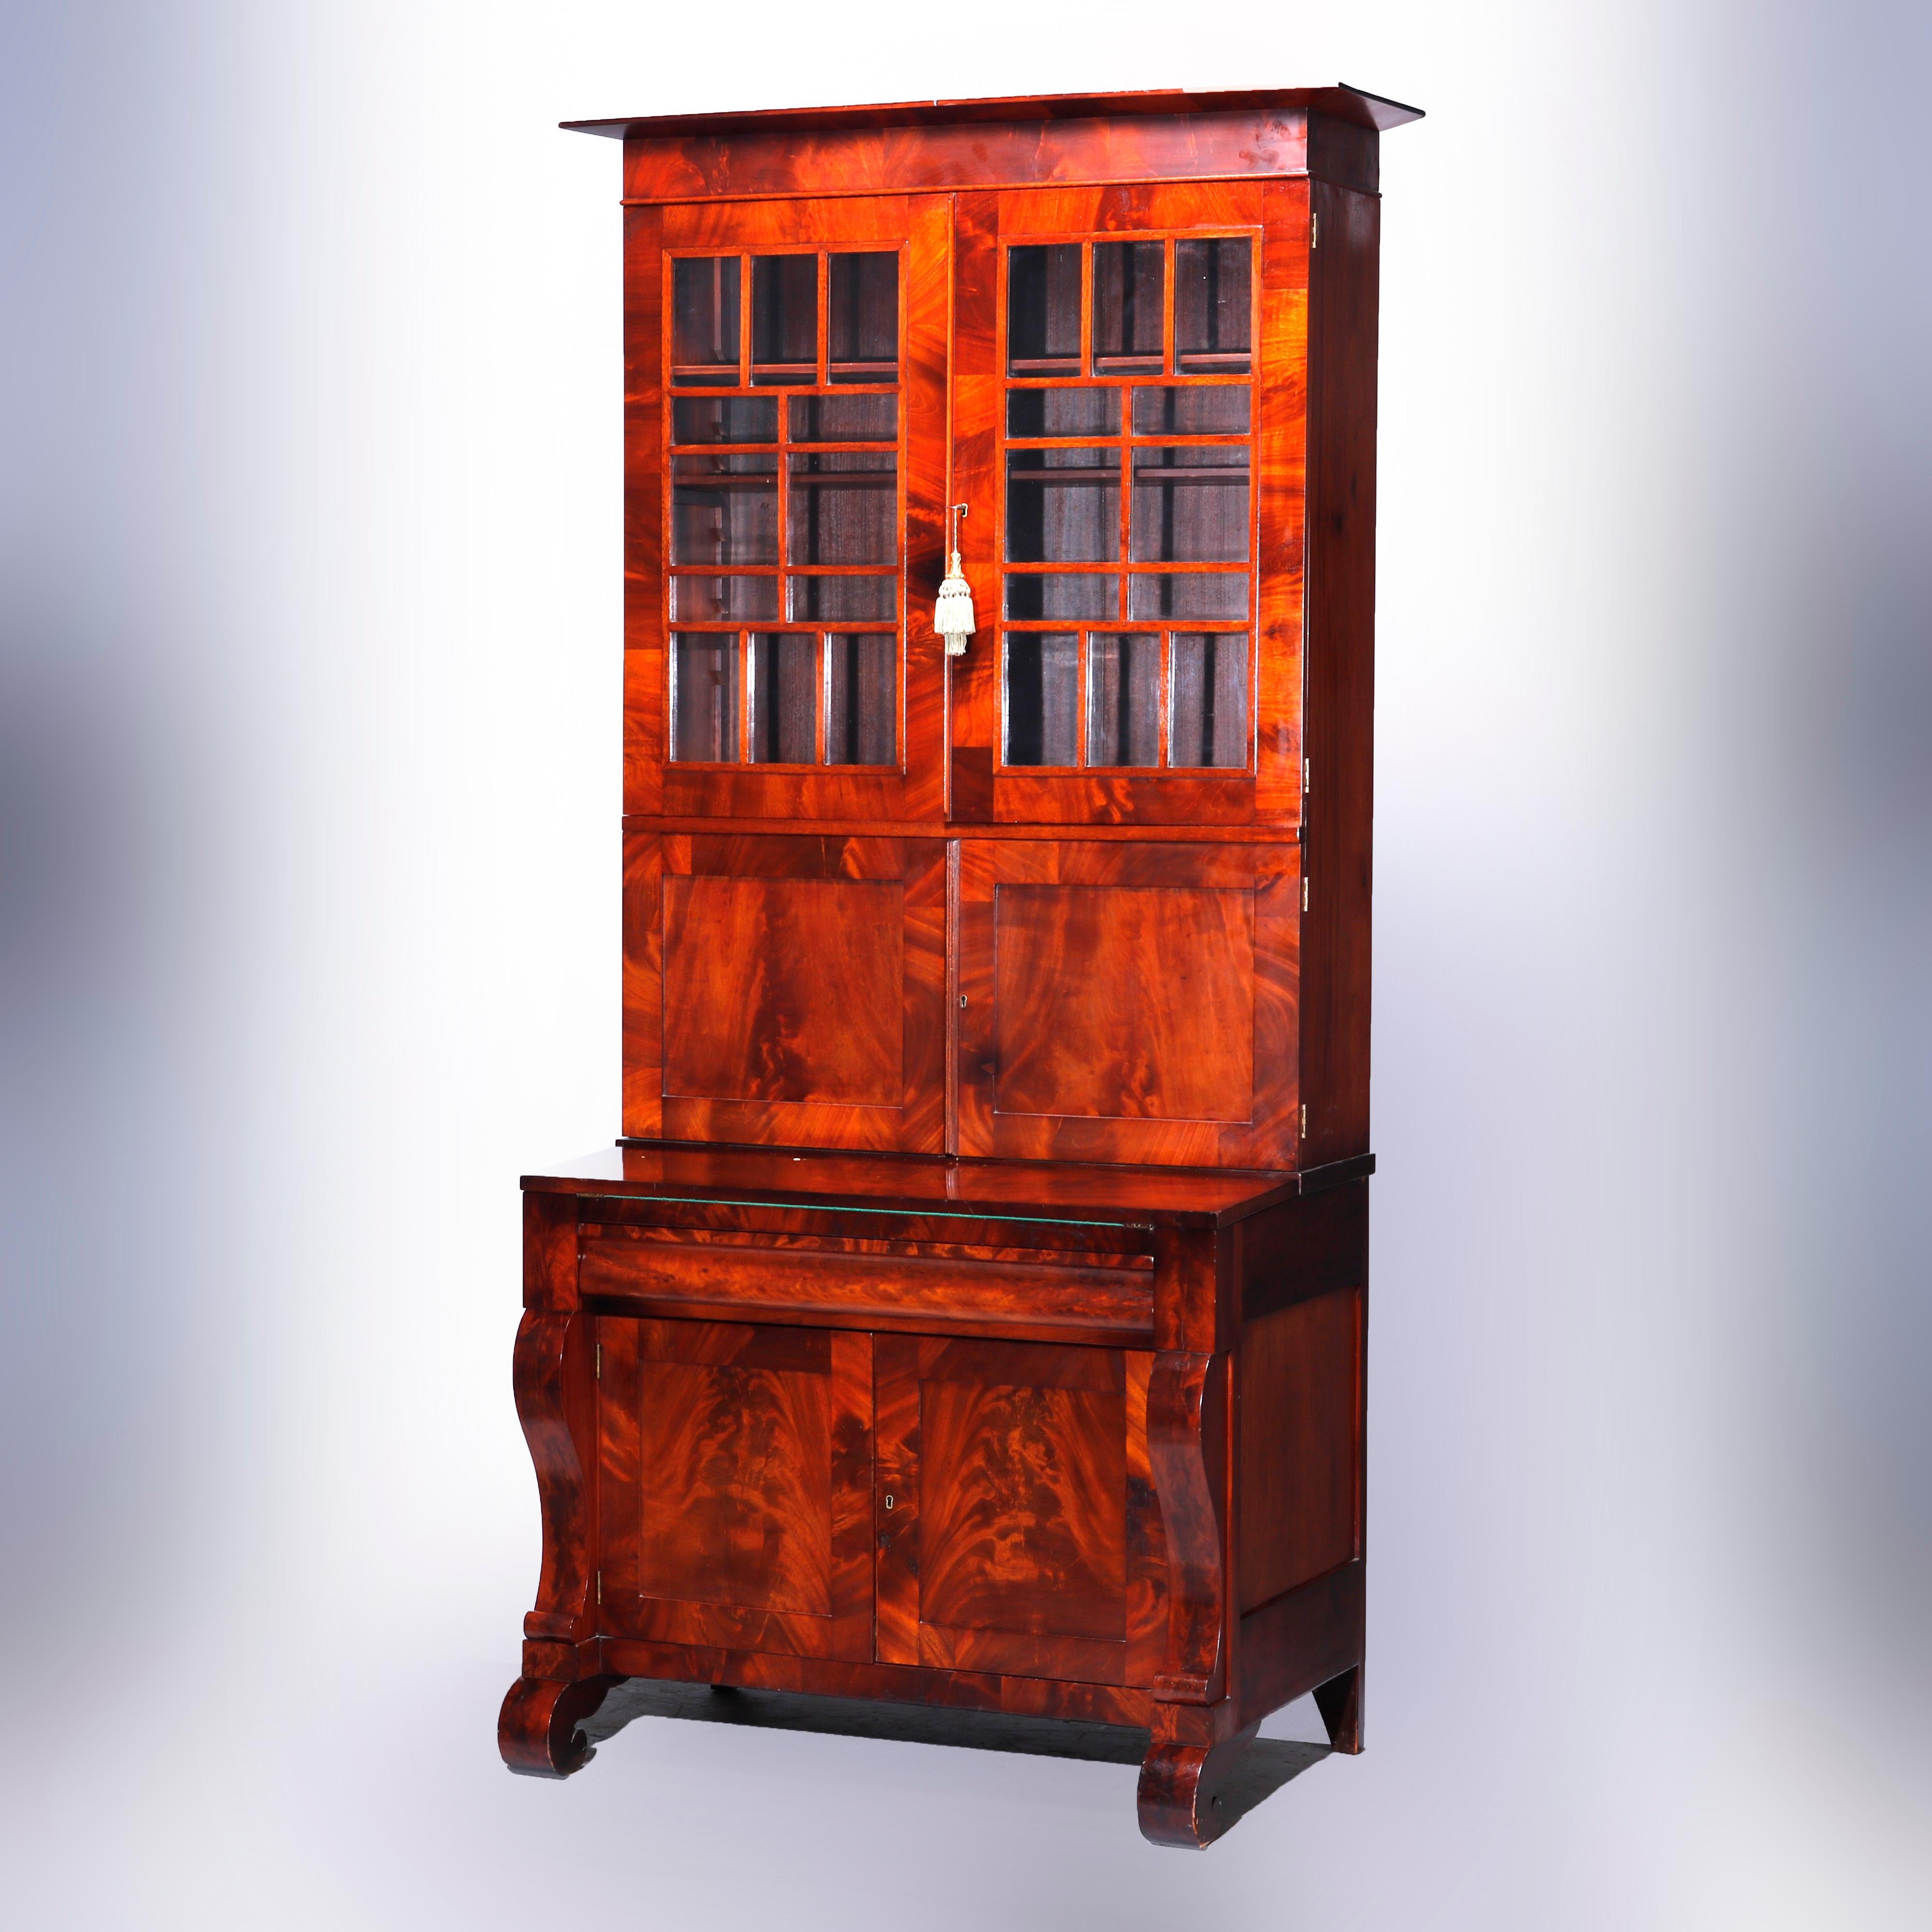 An antique American Empire secretary offers flame mahogany construction with upper bookcase having mullioned glass doors (patterning reminiscent of Fran Lloyd Wright) opening to shelved interior and over double blind door lower cabinet opening to